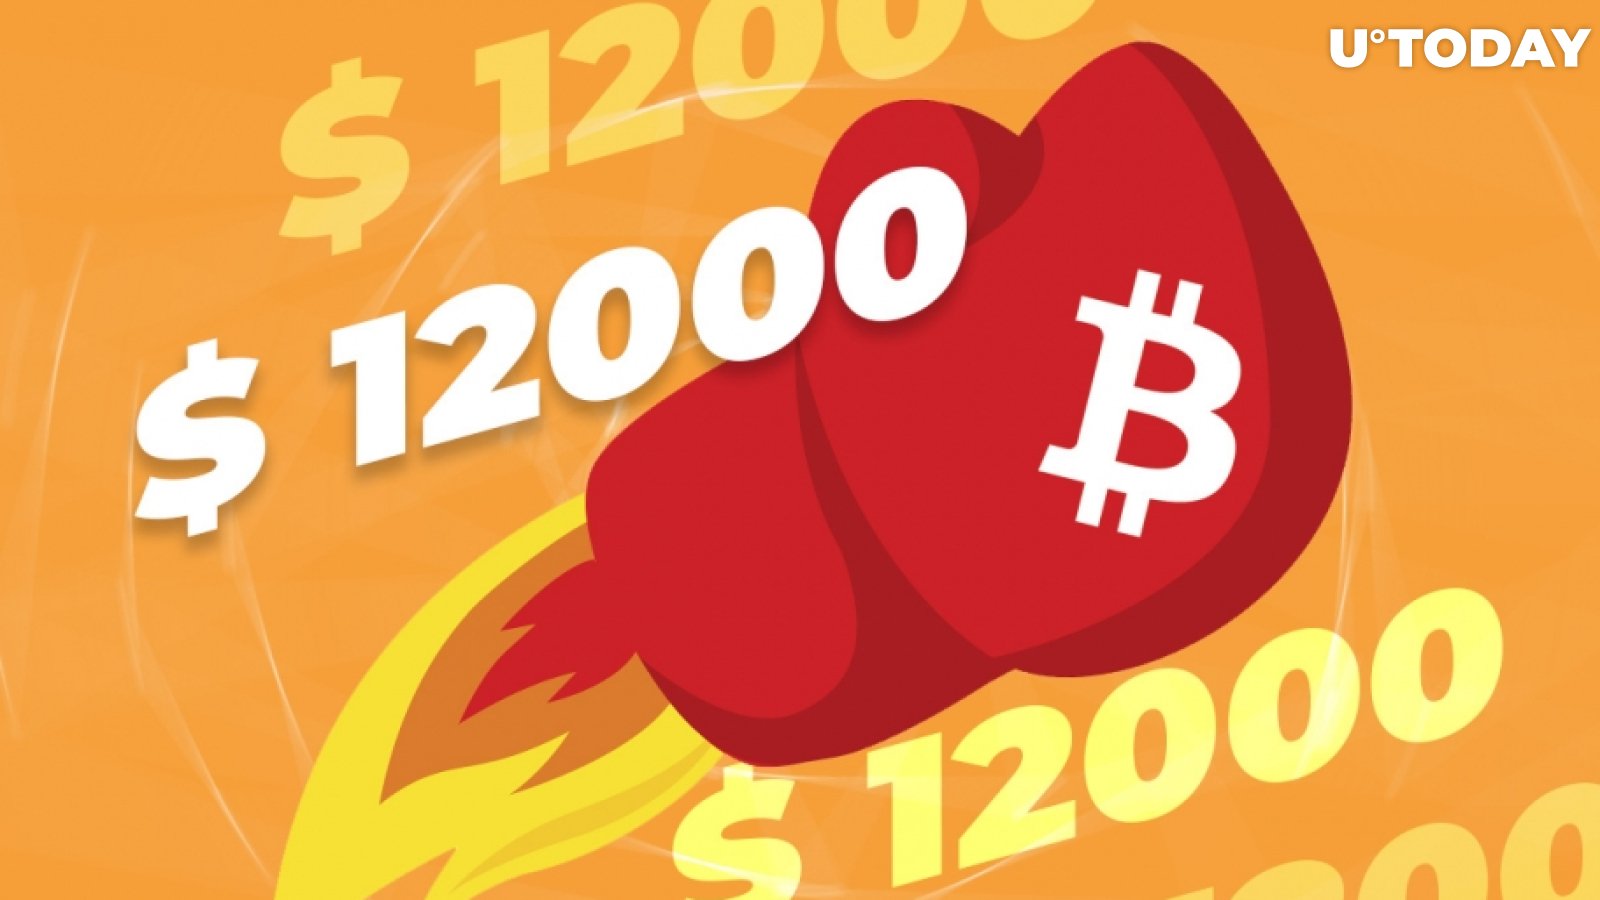 Bitcoin Hits $12K as Its Dominance Surpasses 60 Percent First Time Since August